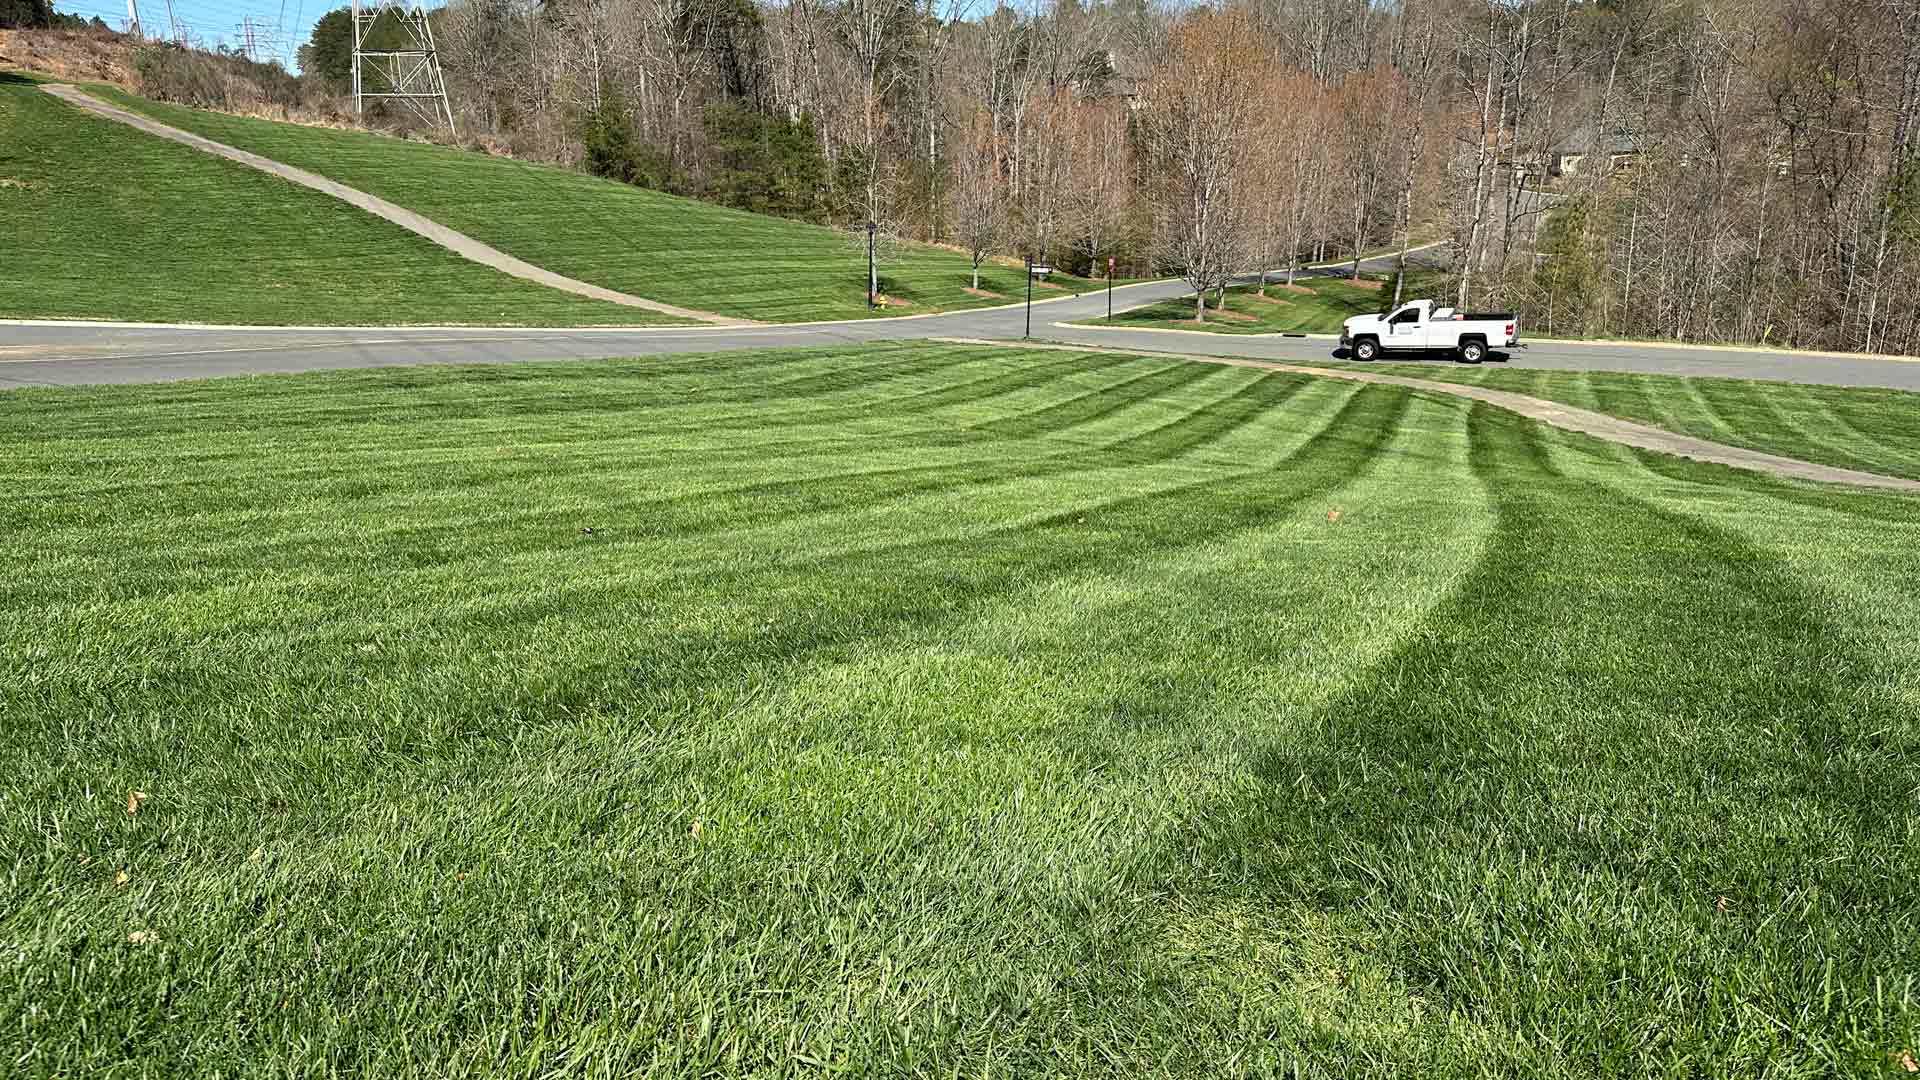 A hillside property in Pineville, NC serviced by professionals.